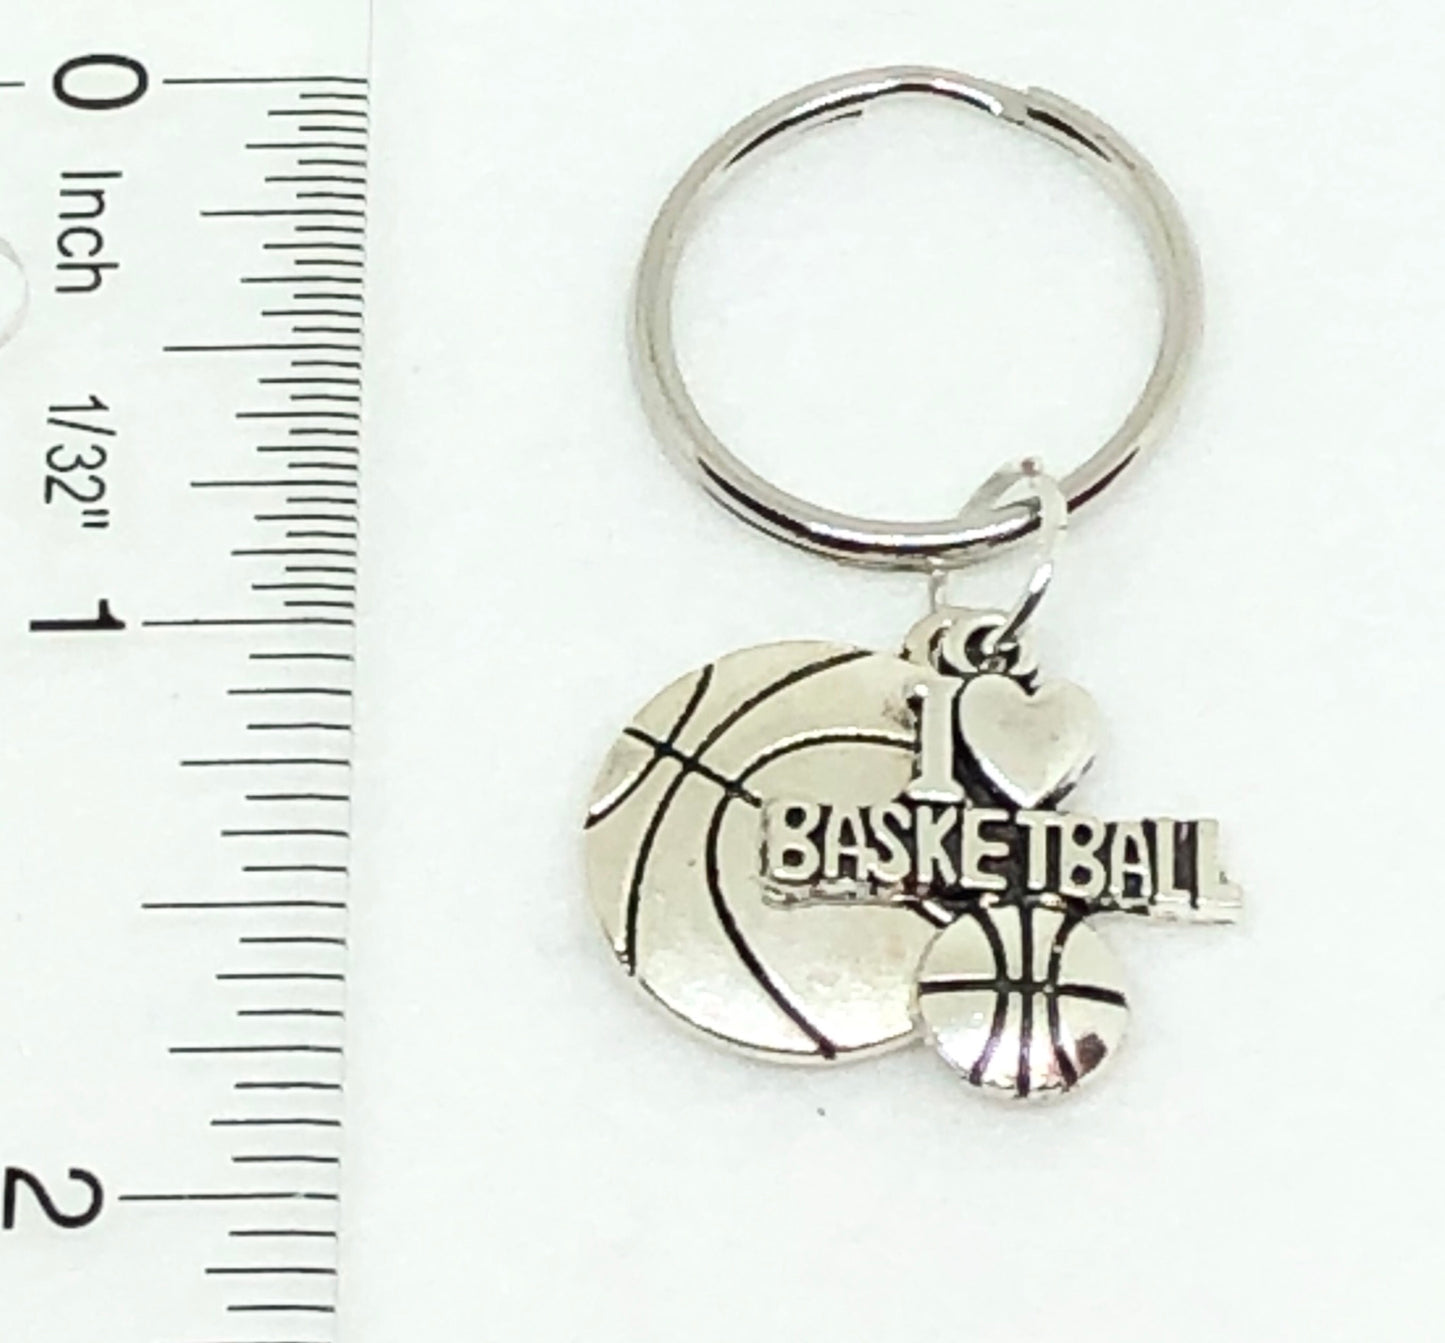 Create Your Own Basketball Charm Key Chain, Gymnastics Accessories - Cheer and Dance On Demand